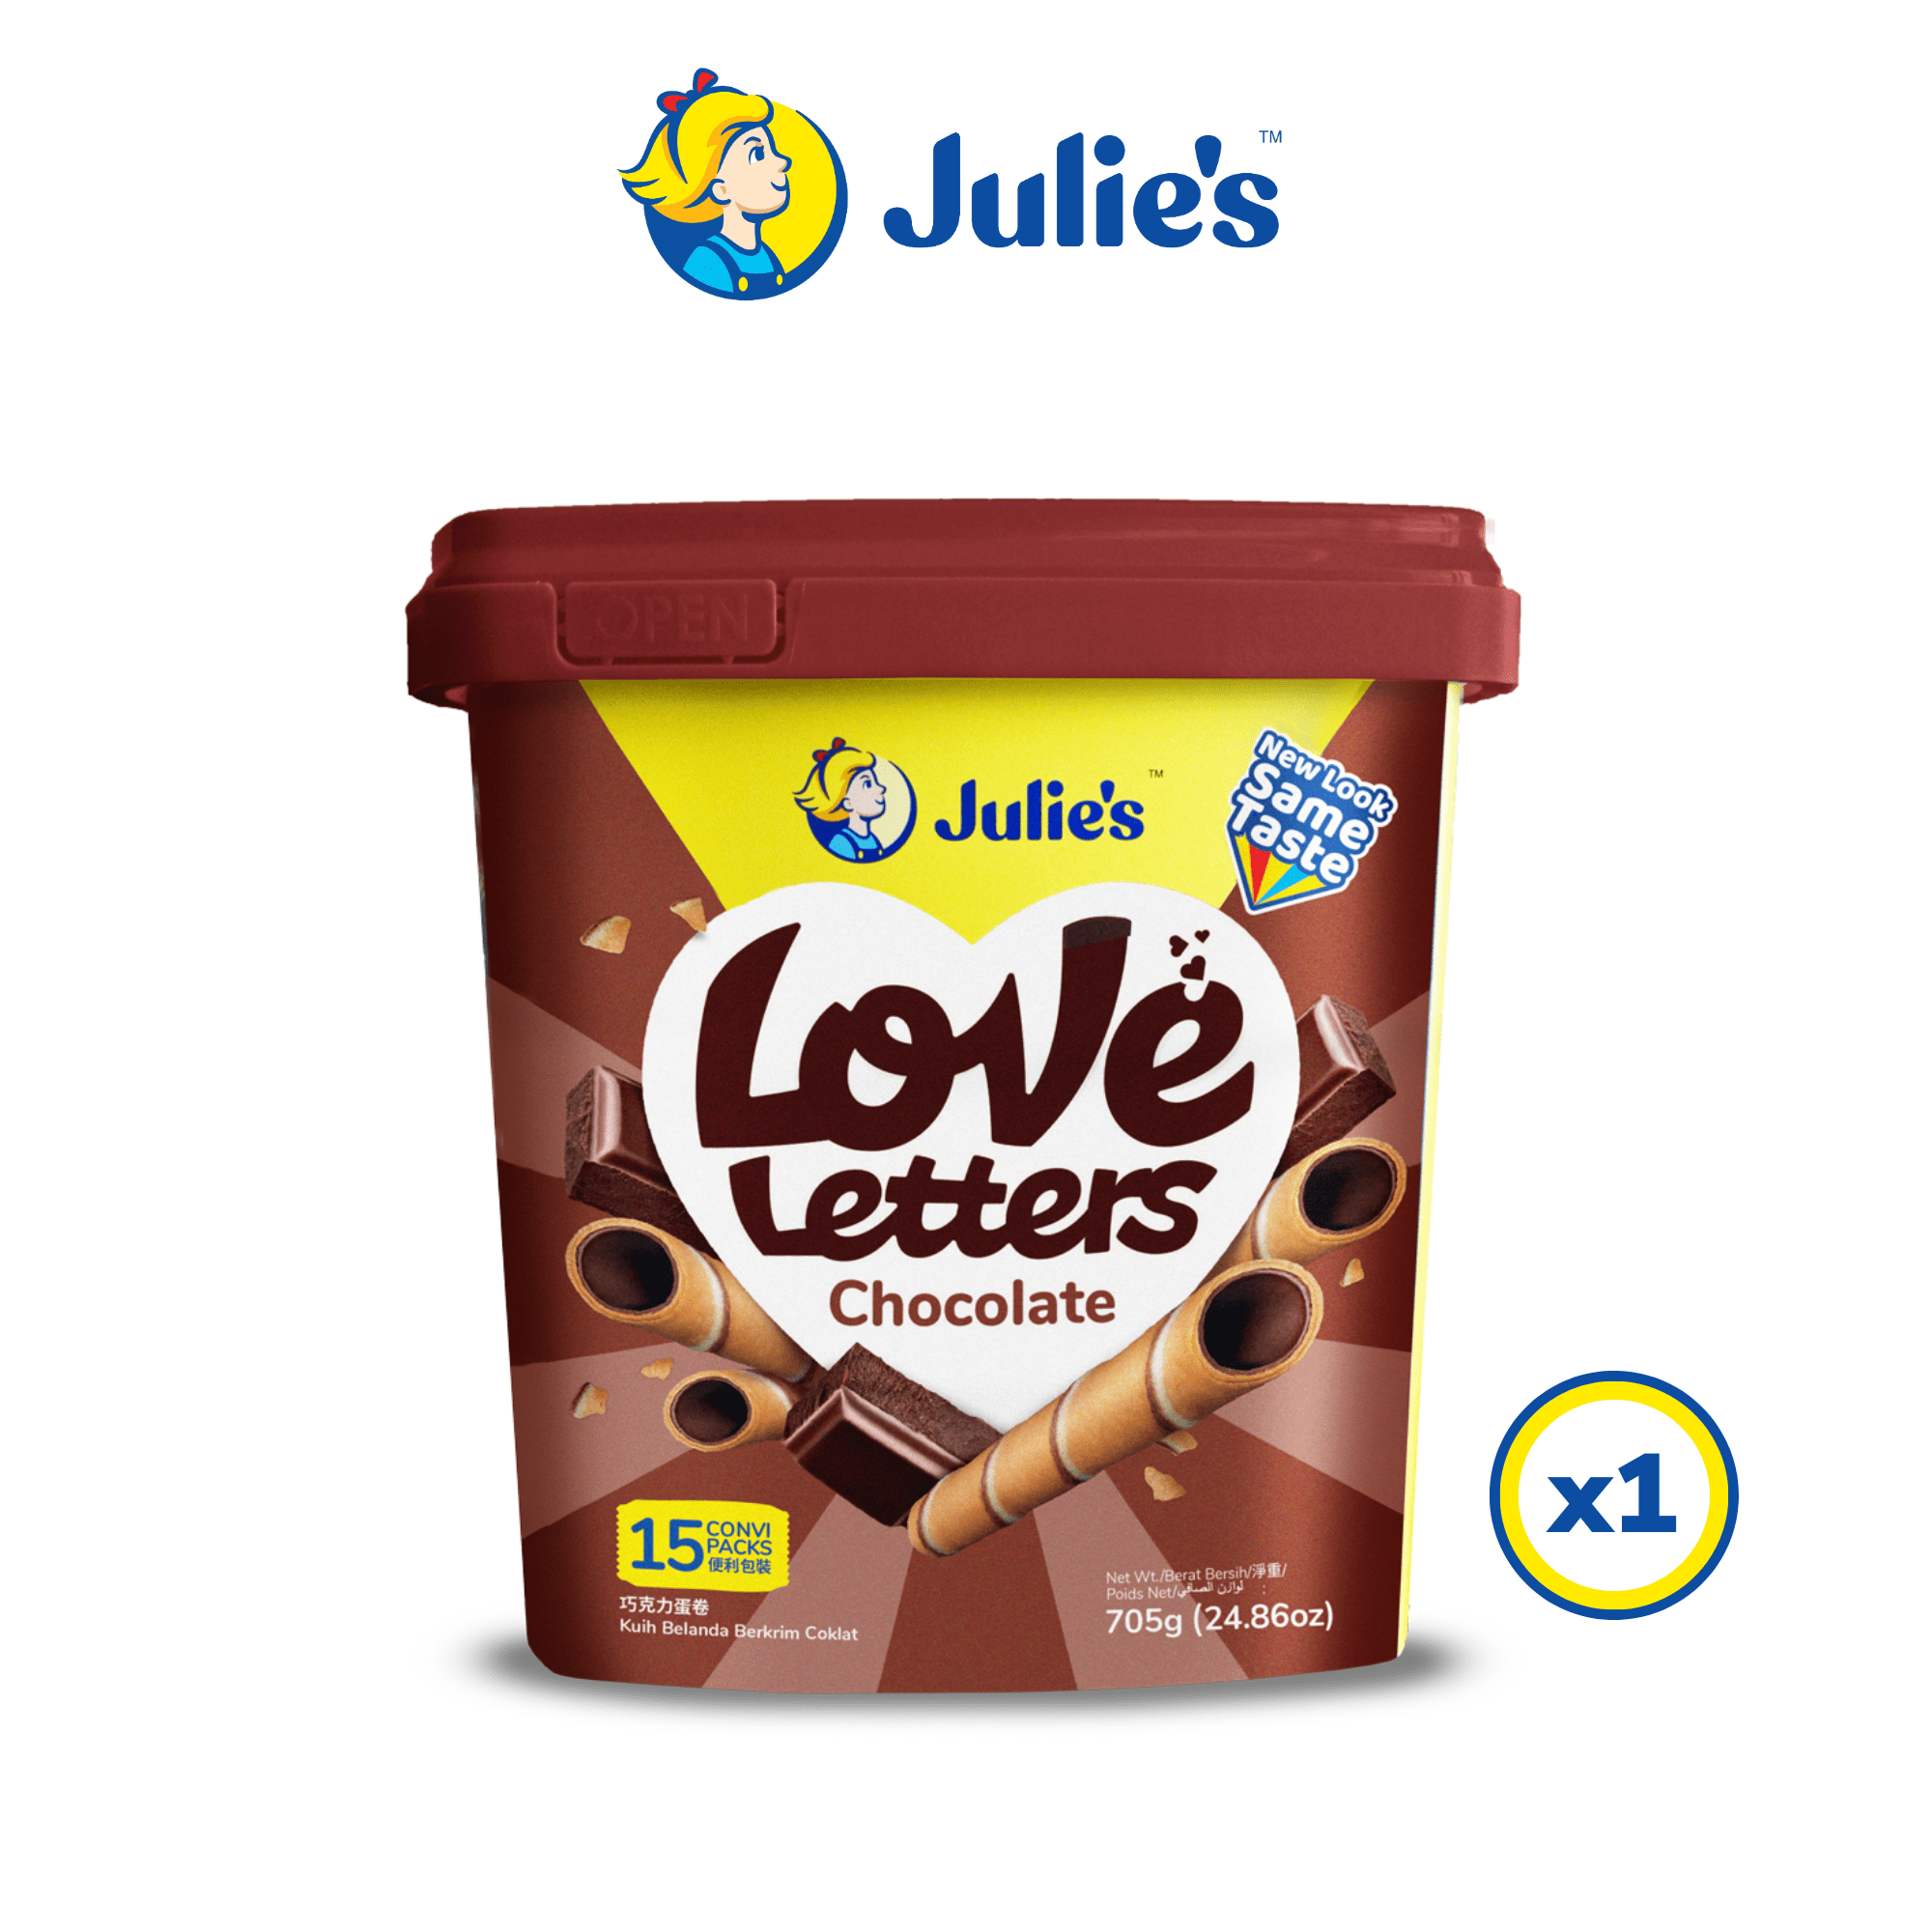 Julie's Love Letters Twin Pack Chocolate & Vanilla 705g